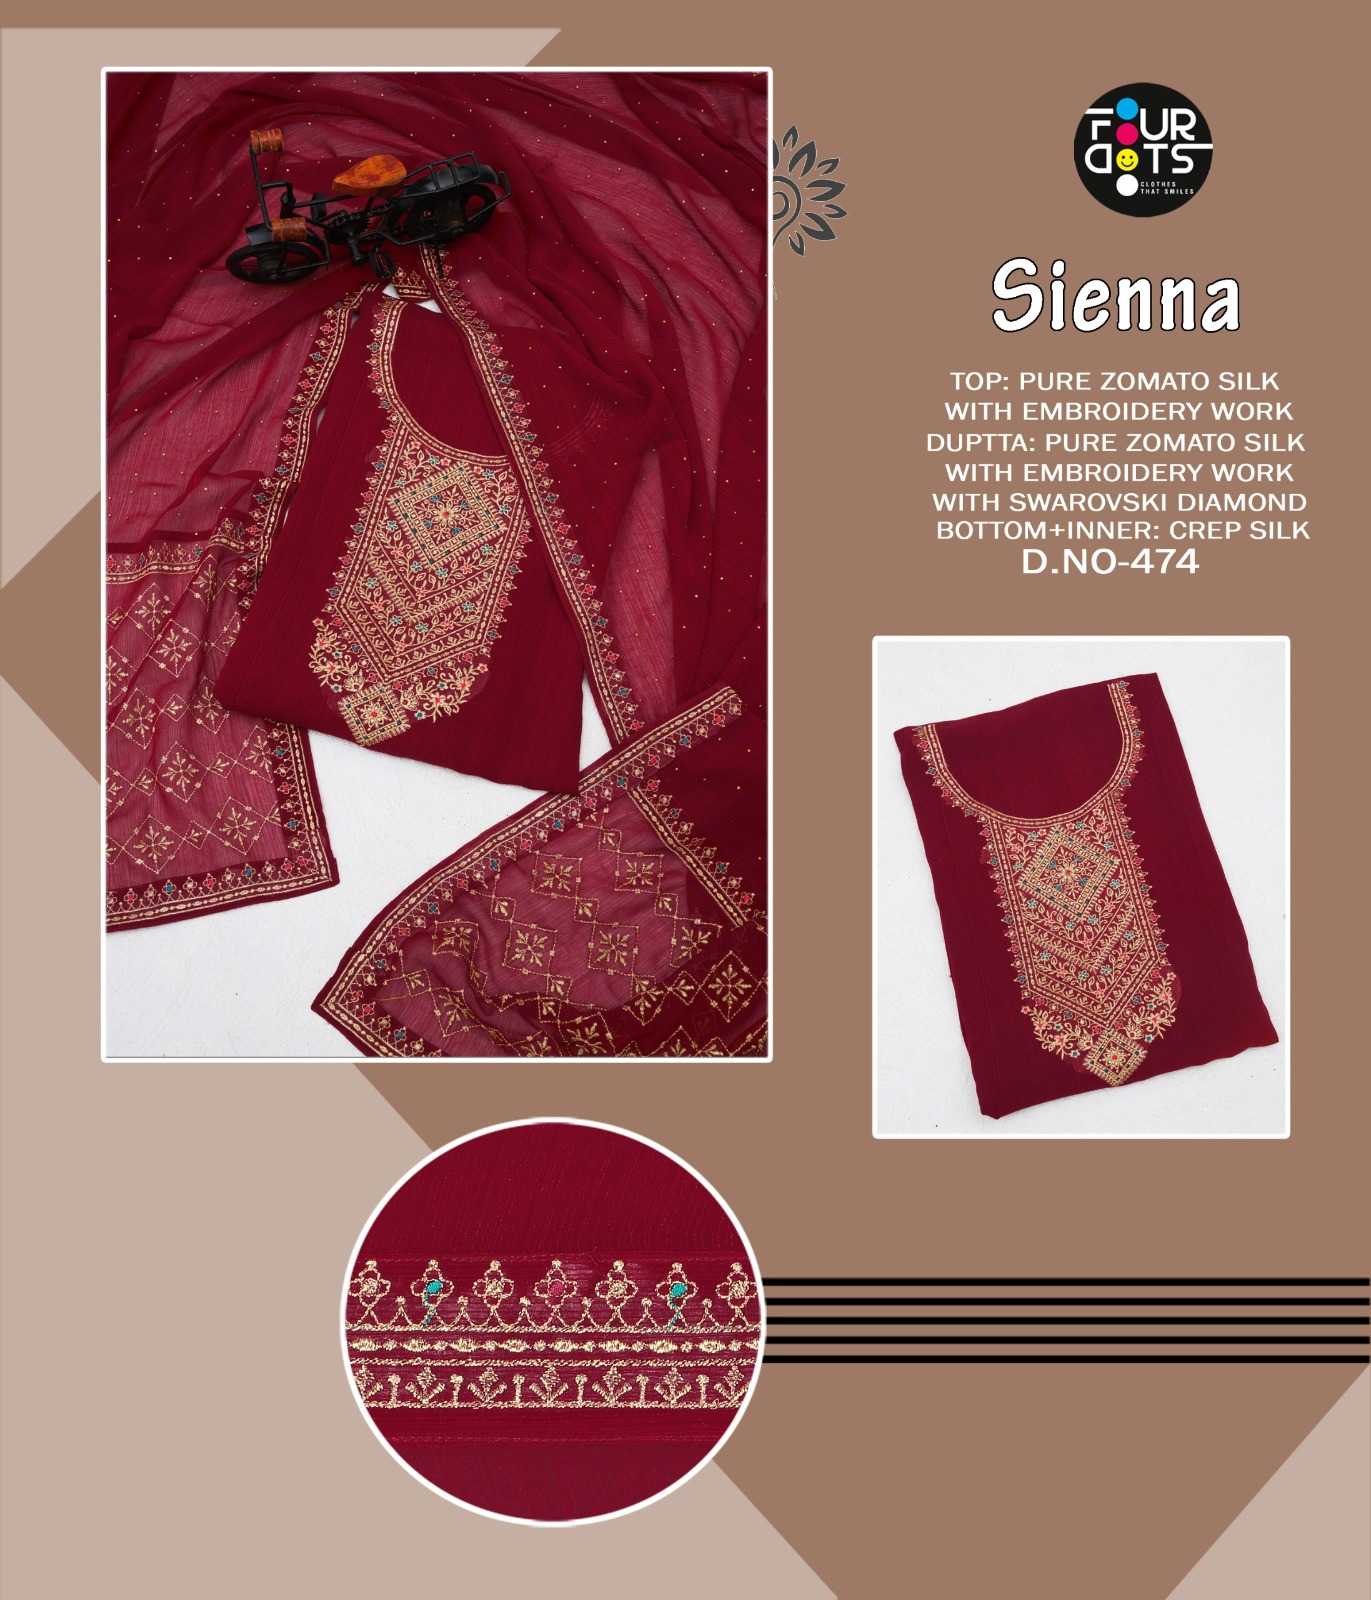 fourdots sienna beautiful zomato silk with embroidery work dress material 